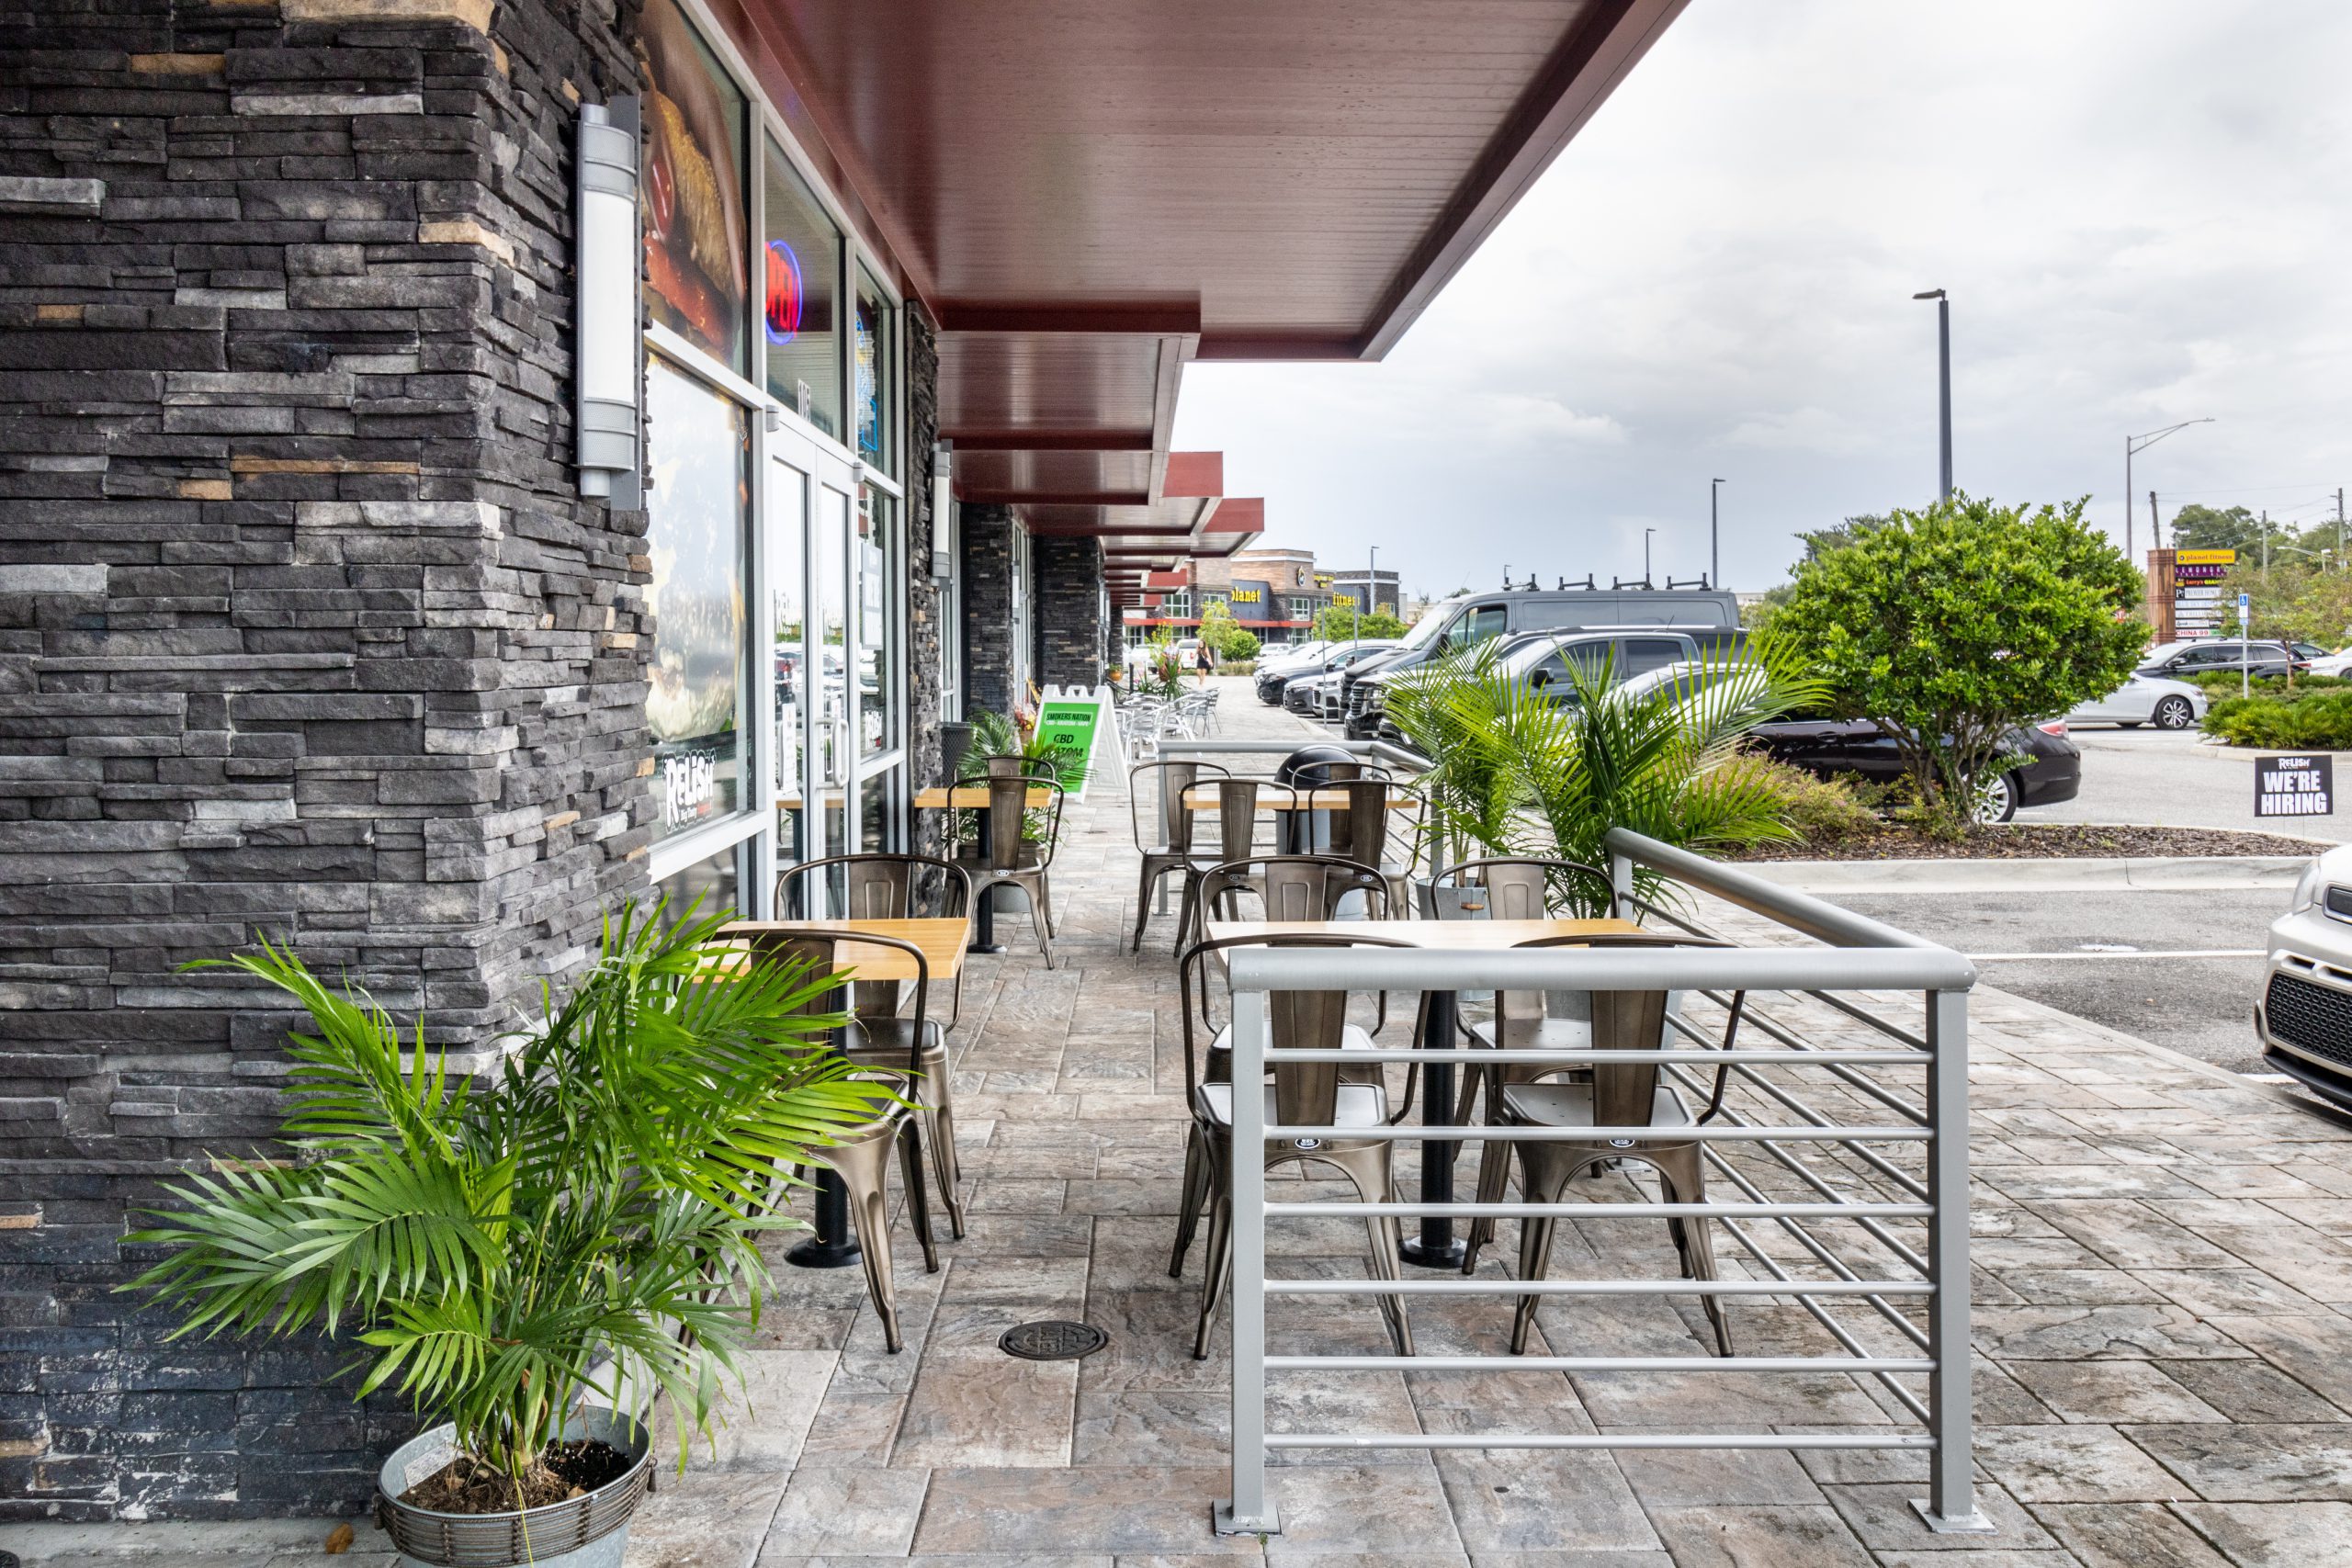 The exterior of a restaurant including an outdoor seating area.